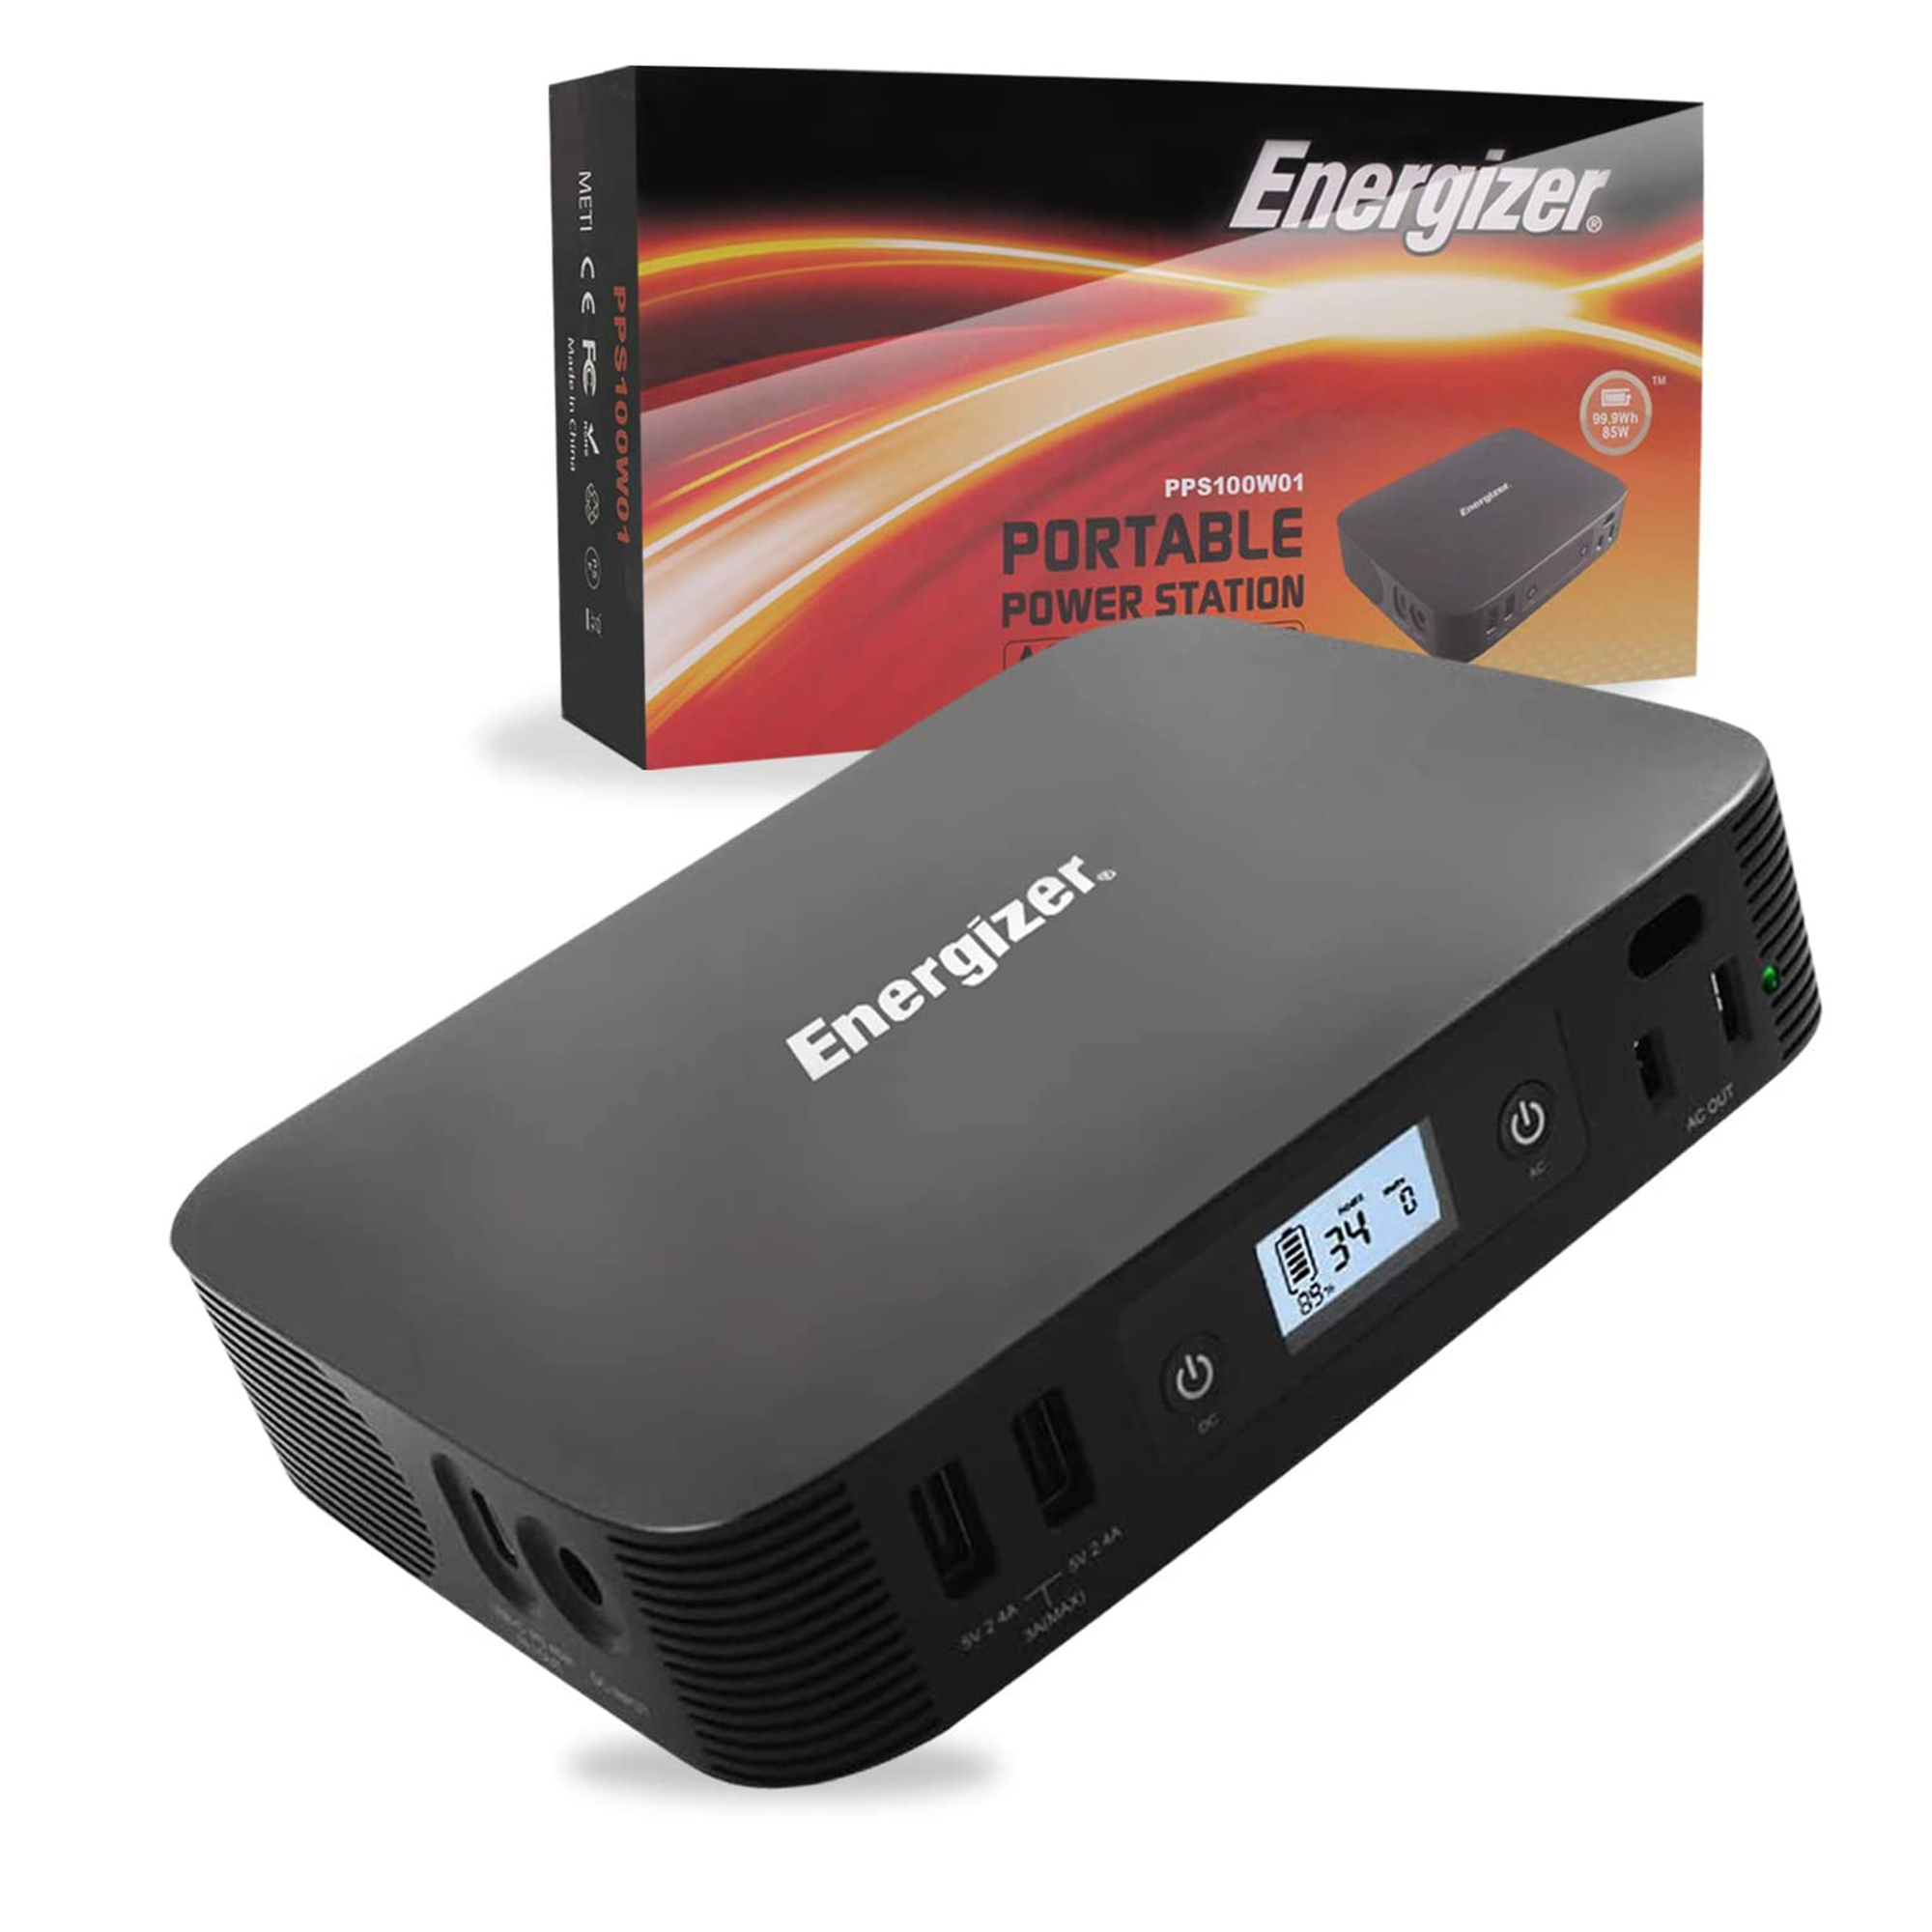 Energizer PPS100 Portable Power Station packing